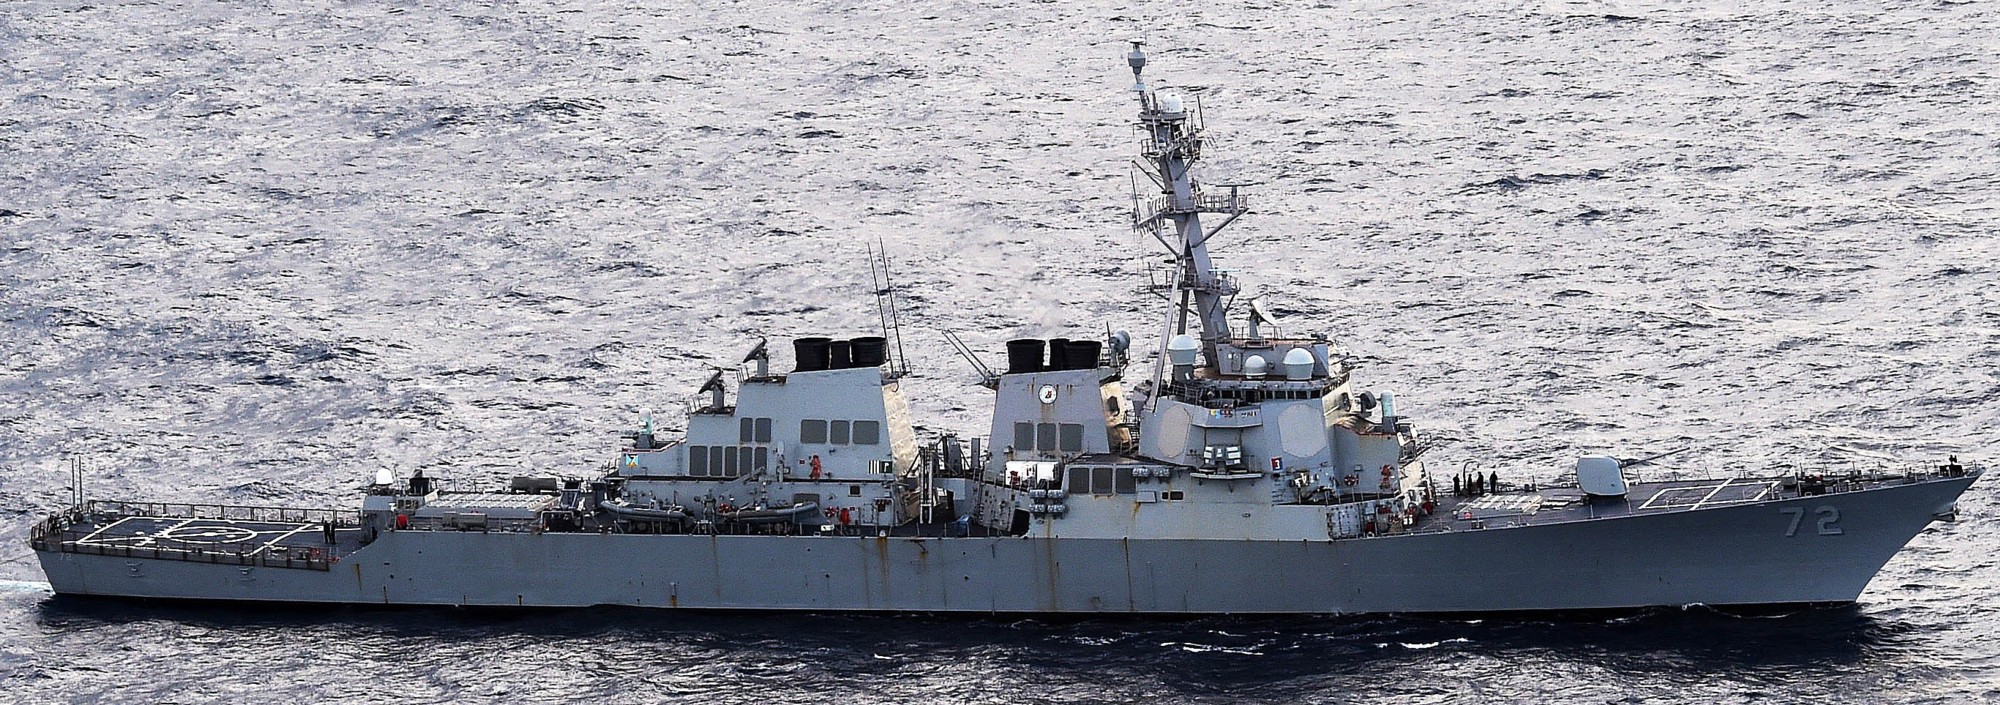 ddg-72 uss mahan guided missile destroyer arleigh burke class aegis bmd 17